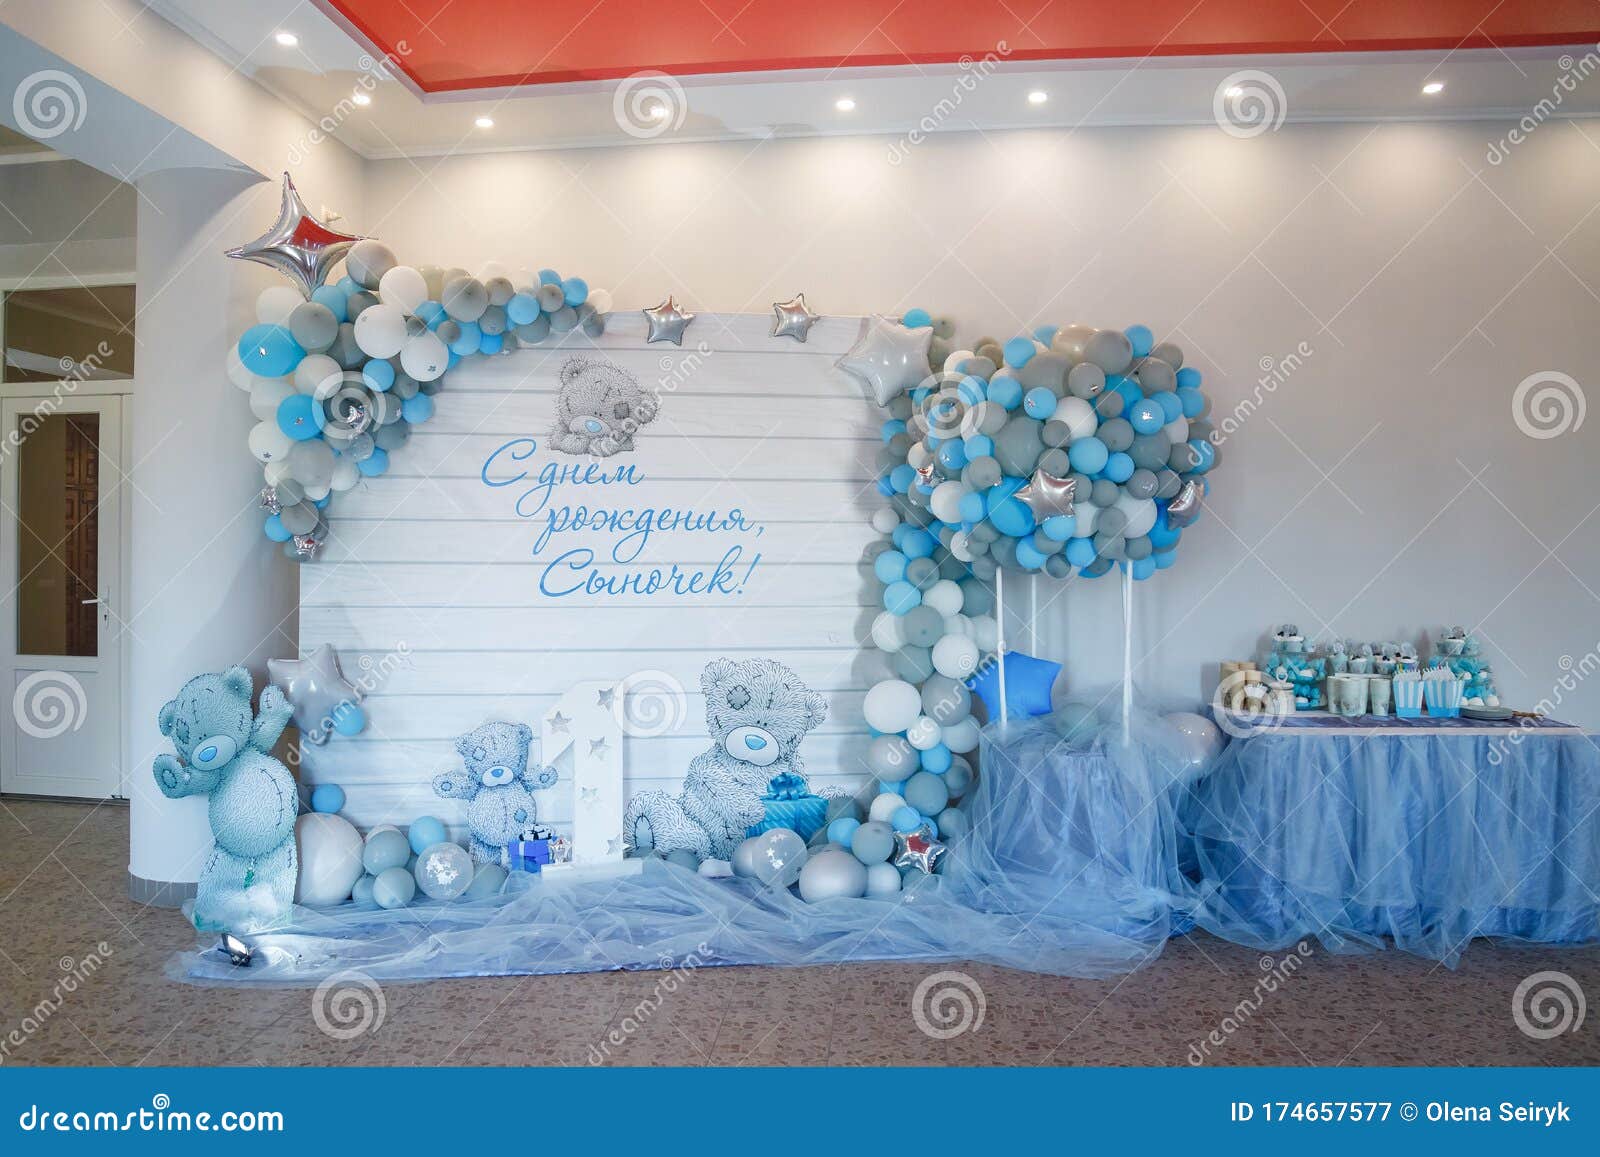 One Year Boy Party Decorations With Balloons And Candy Bar Stock Image Image Of Background Candy 174657577